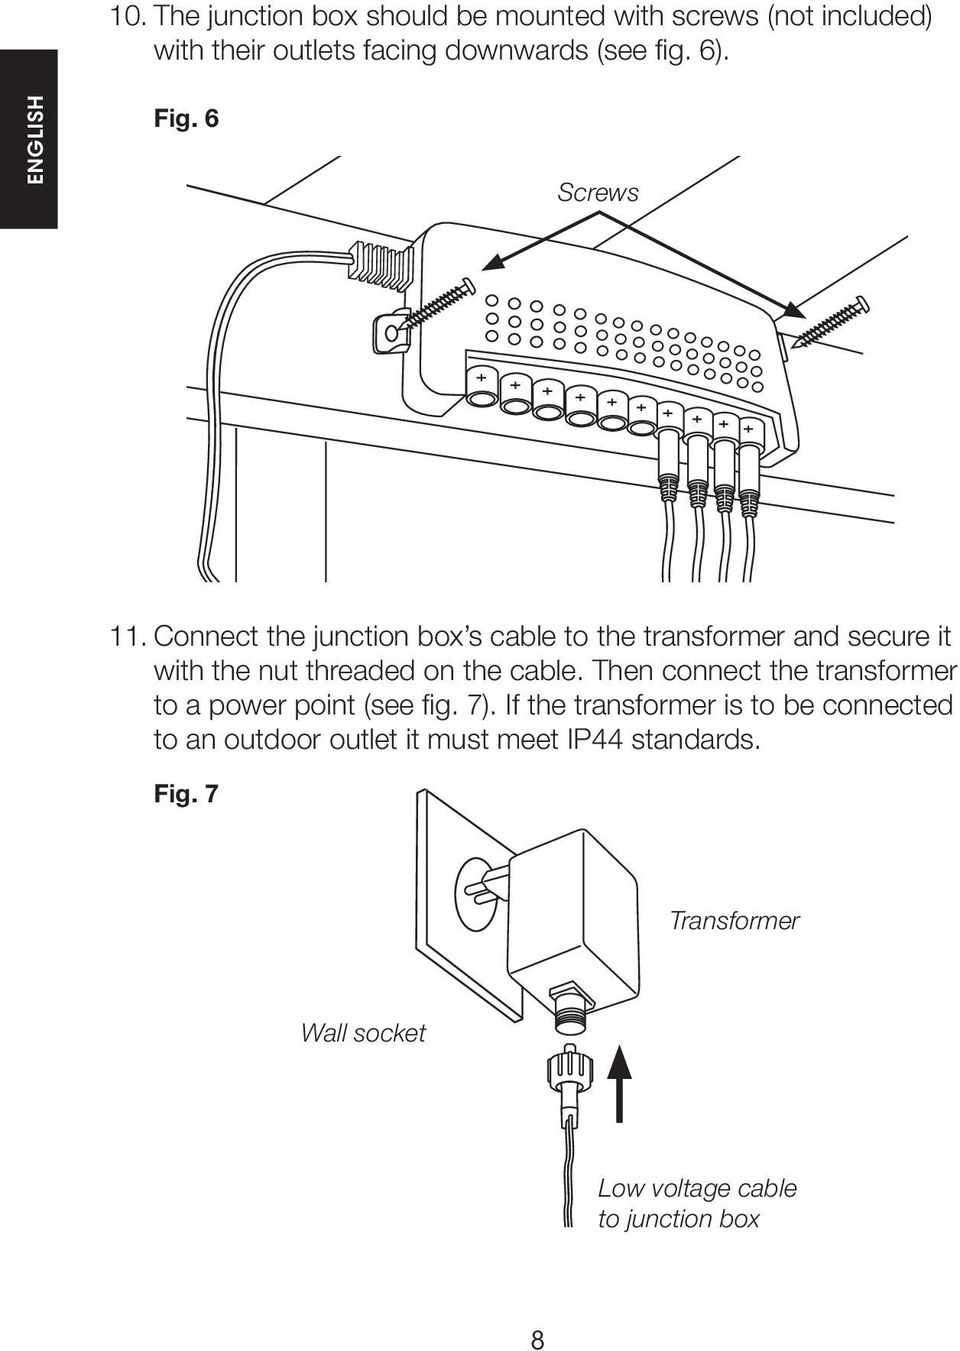 Connect the junction box s cable to the transformer and secure it with the nut threaded on the cable.